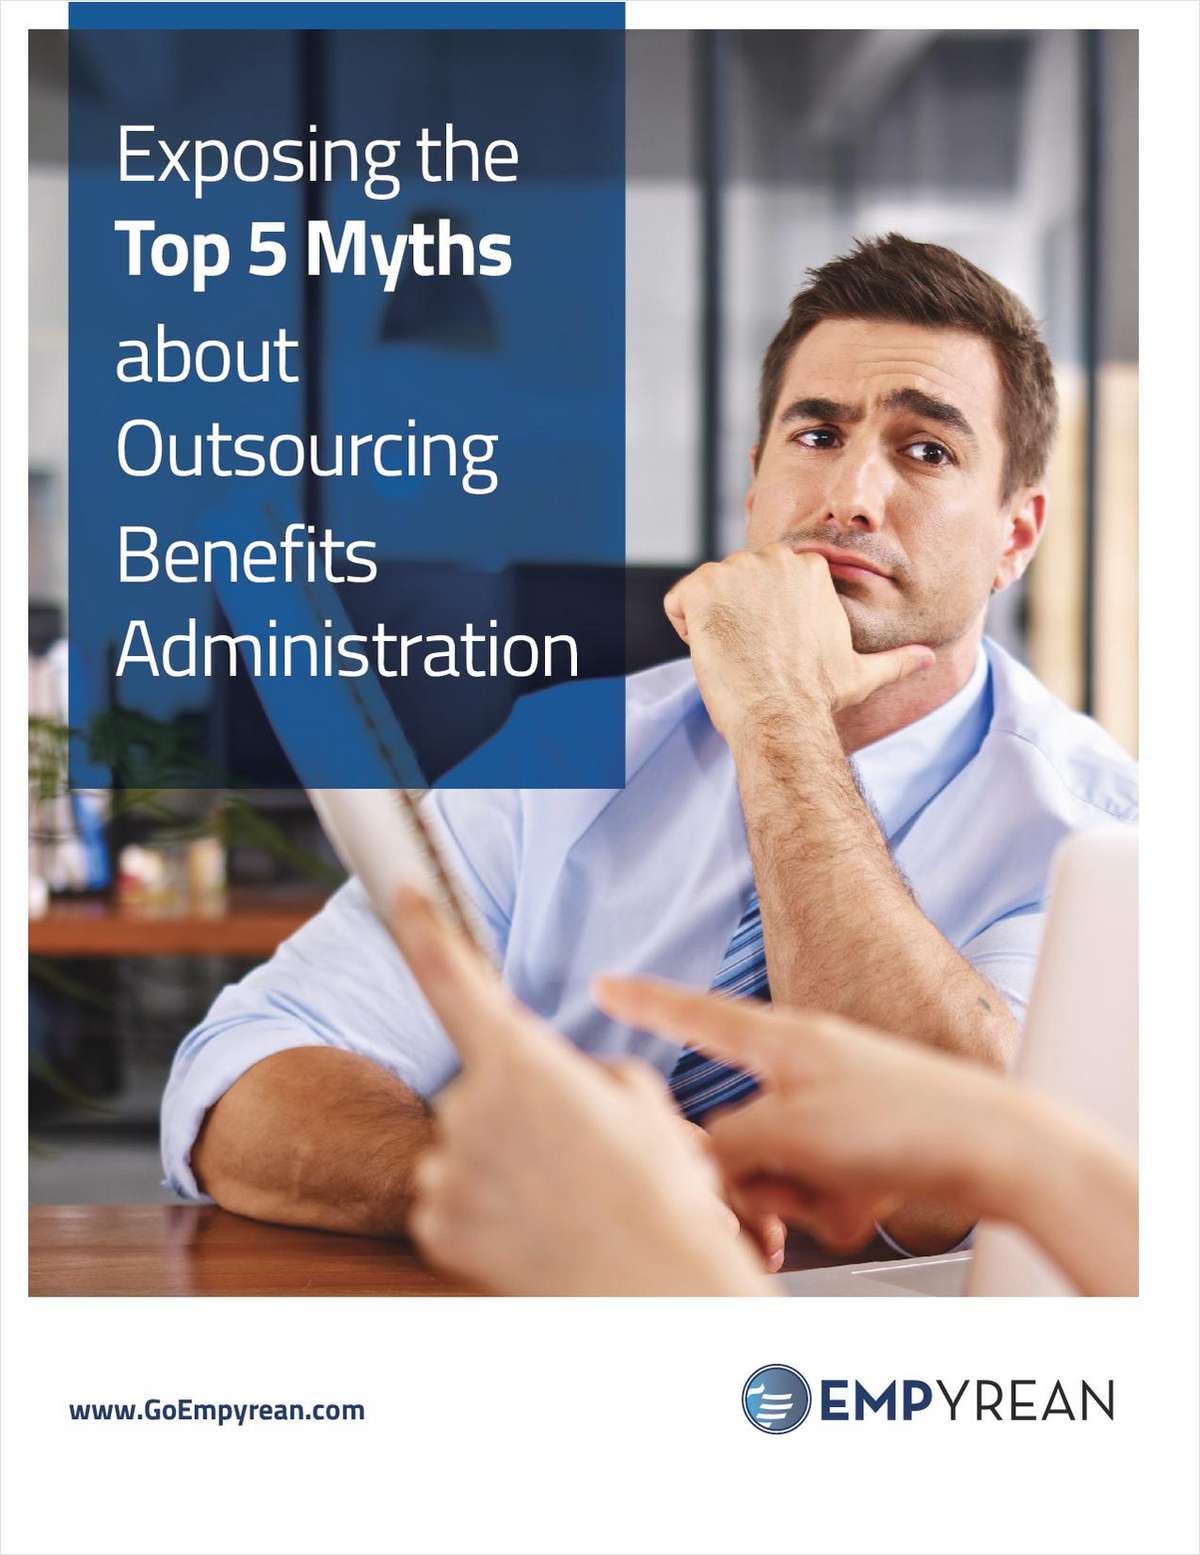 Exposing the Top 5 Myths about Outsourcing Benefits Administration